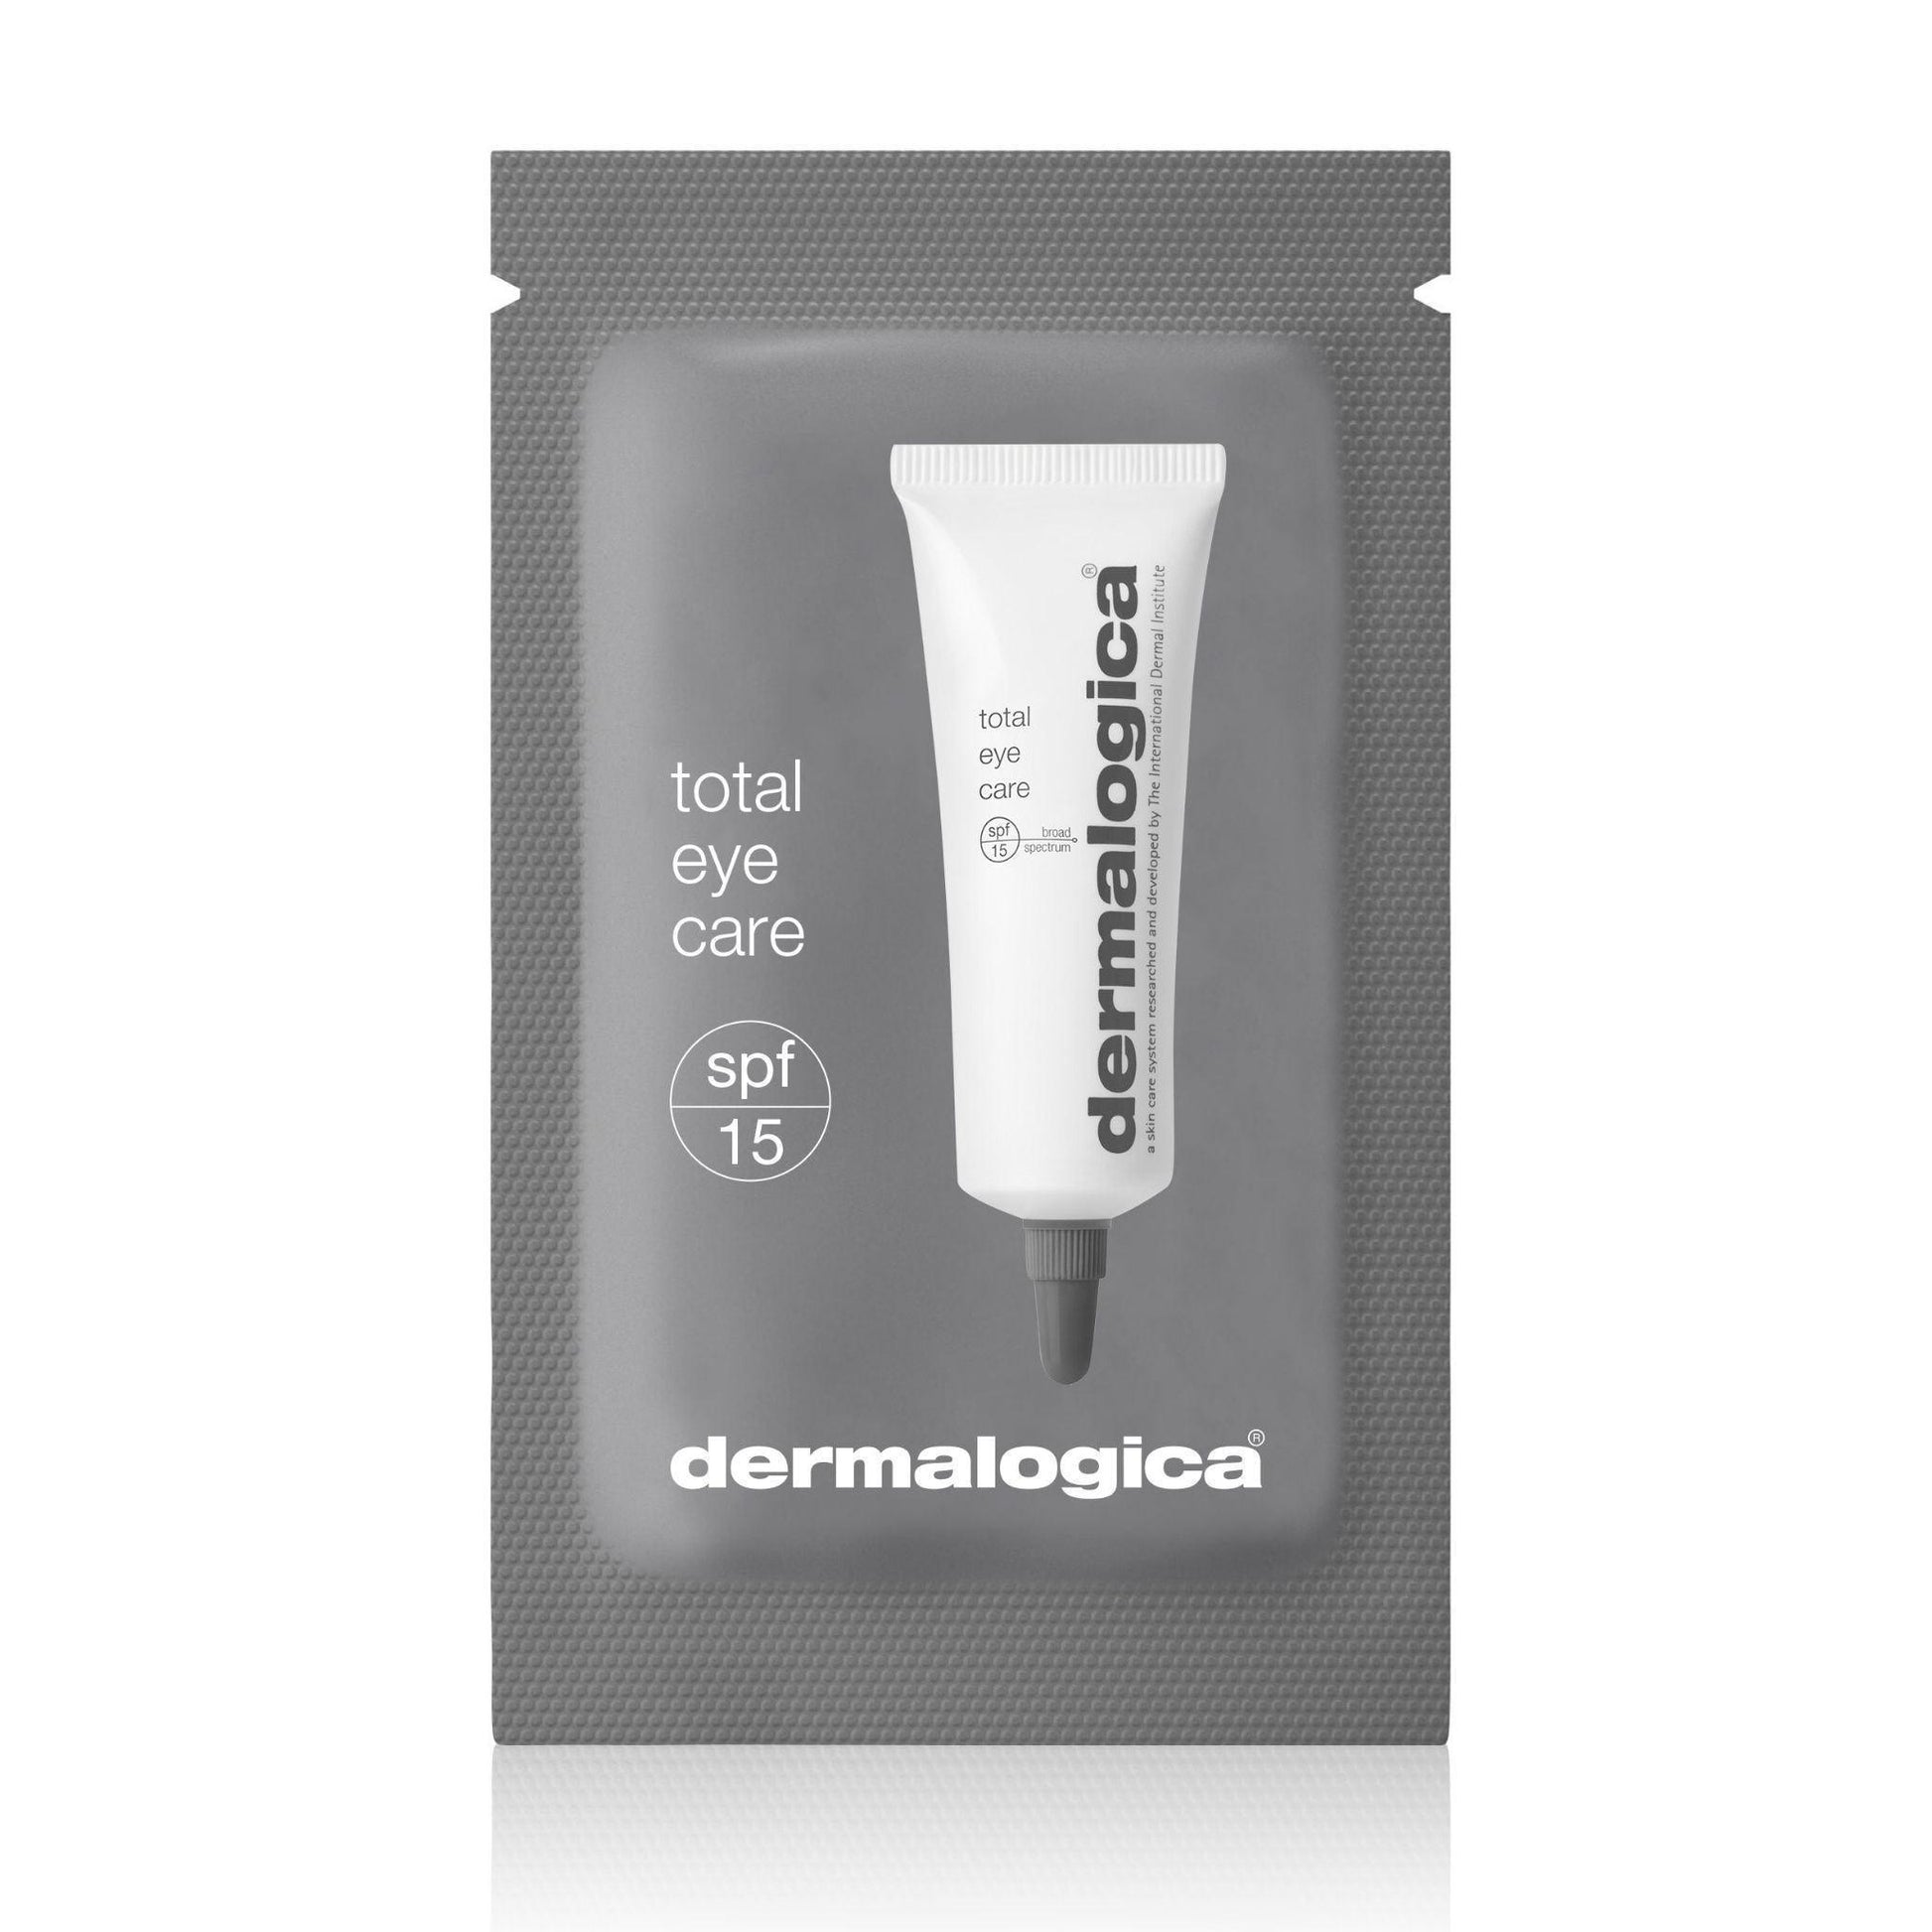 total eye care with spf15 (sample) - Dermalogica Thailand